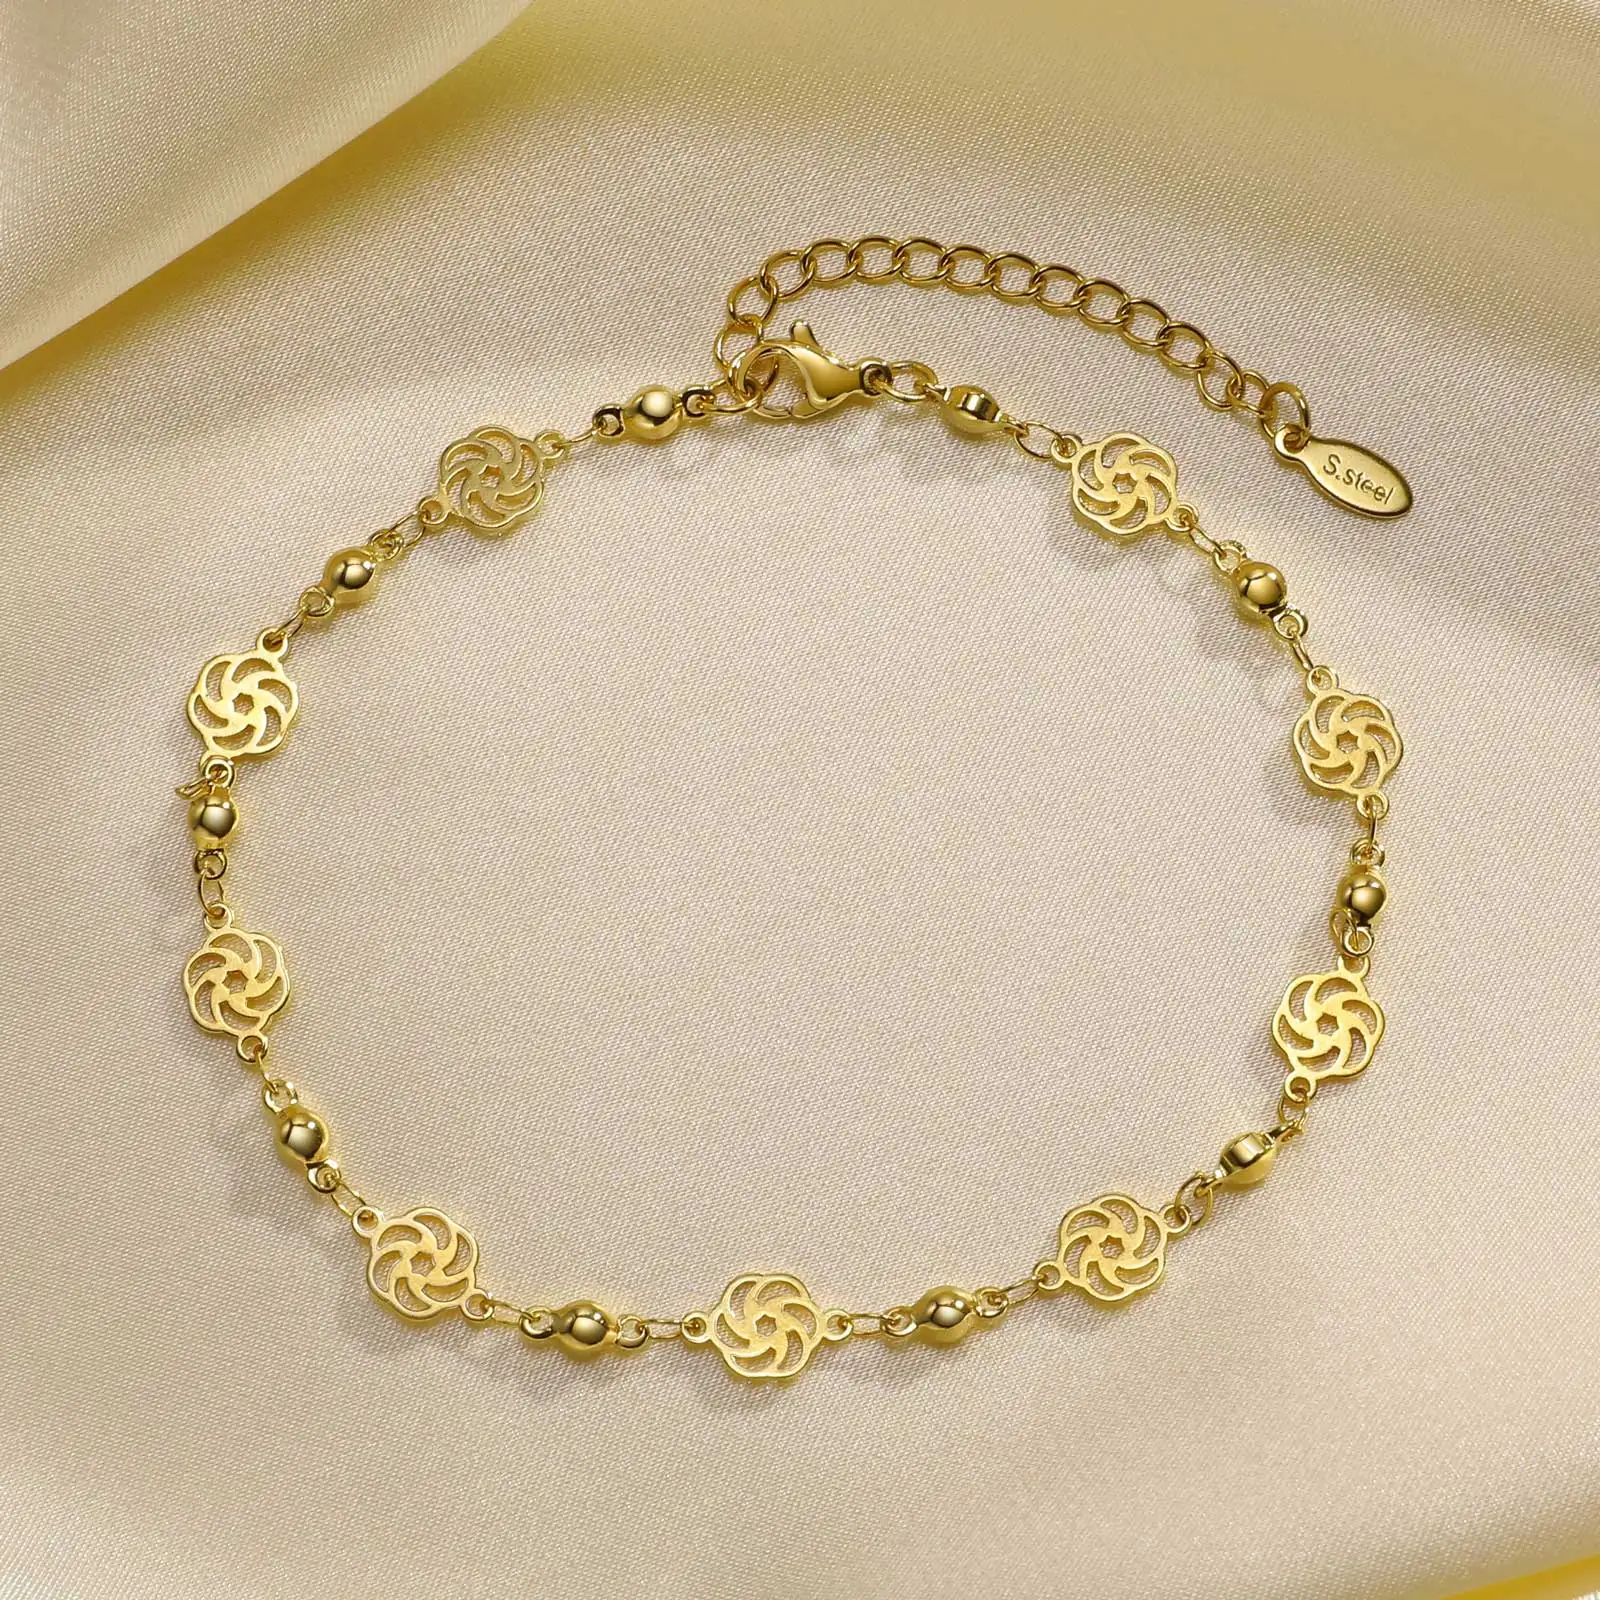 Women's Chic Hollow Rose Artless Anklets Jewelry, Gold Color Stainless Steel Chains, Fashion Anklet For Daily Beach Holiday